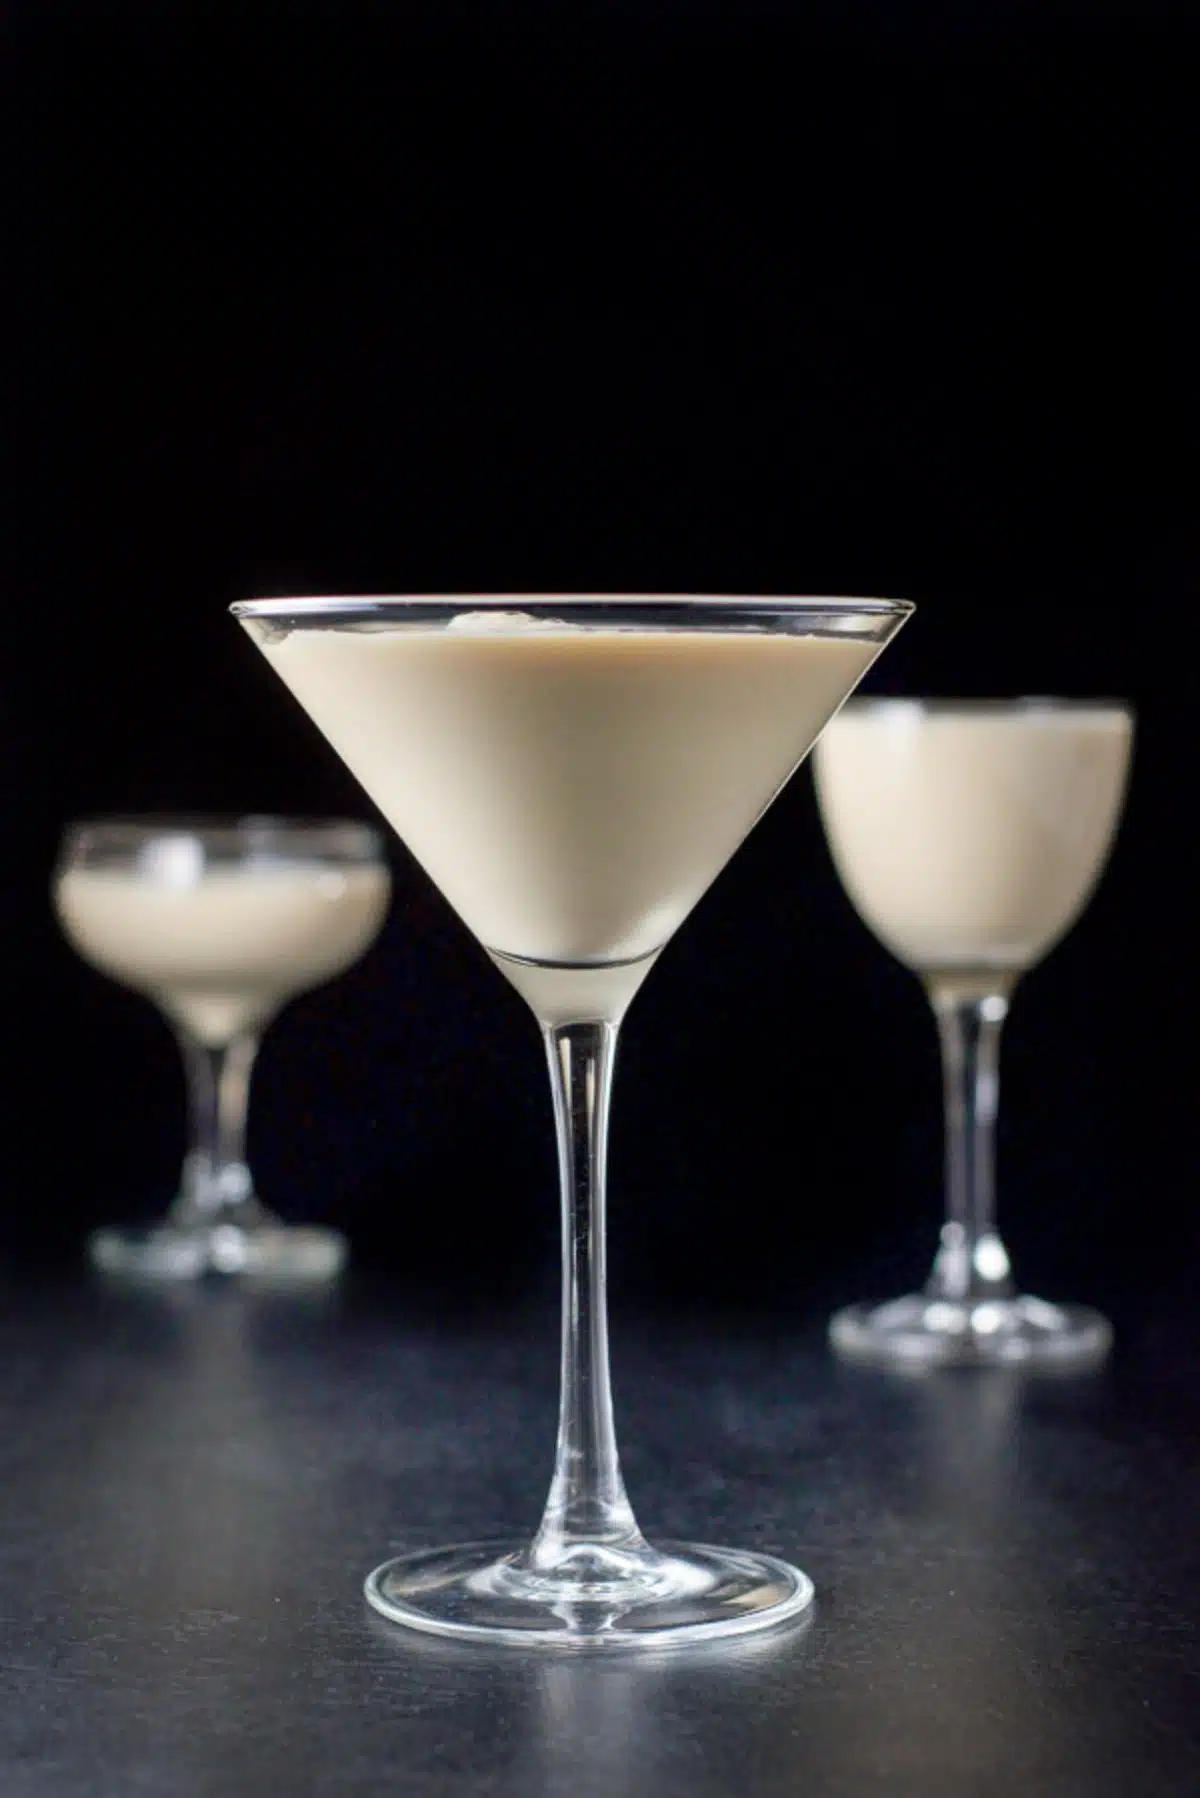 Vertical view of the creamy cocktail in the martini glasses and coupes